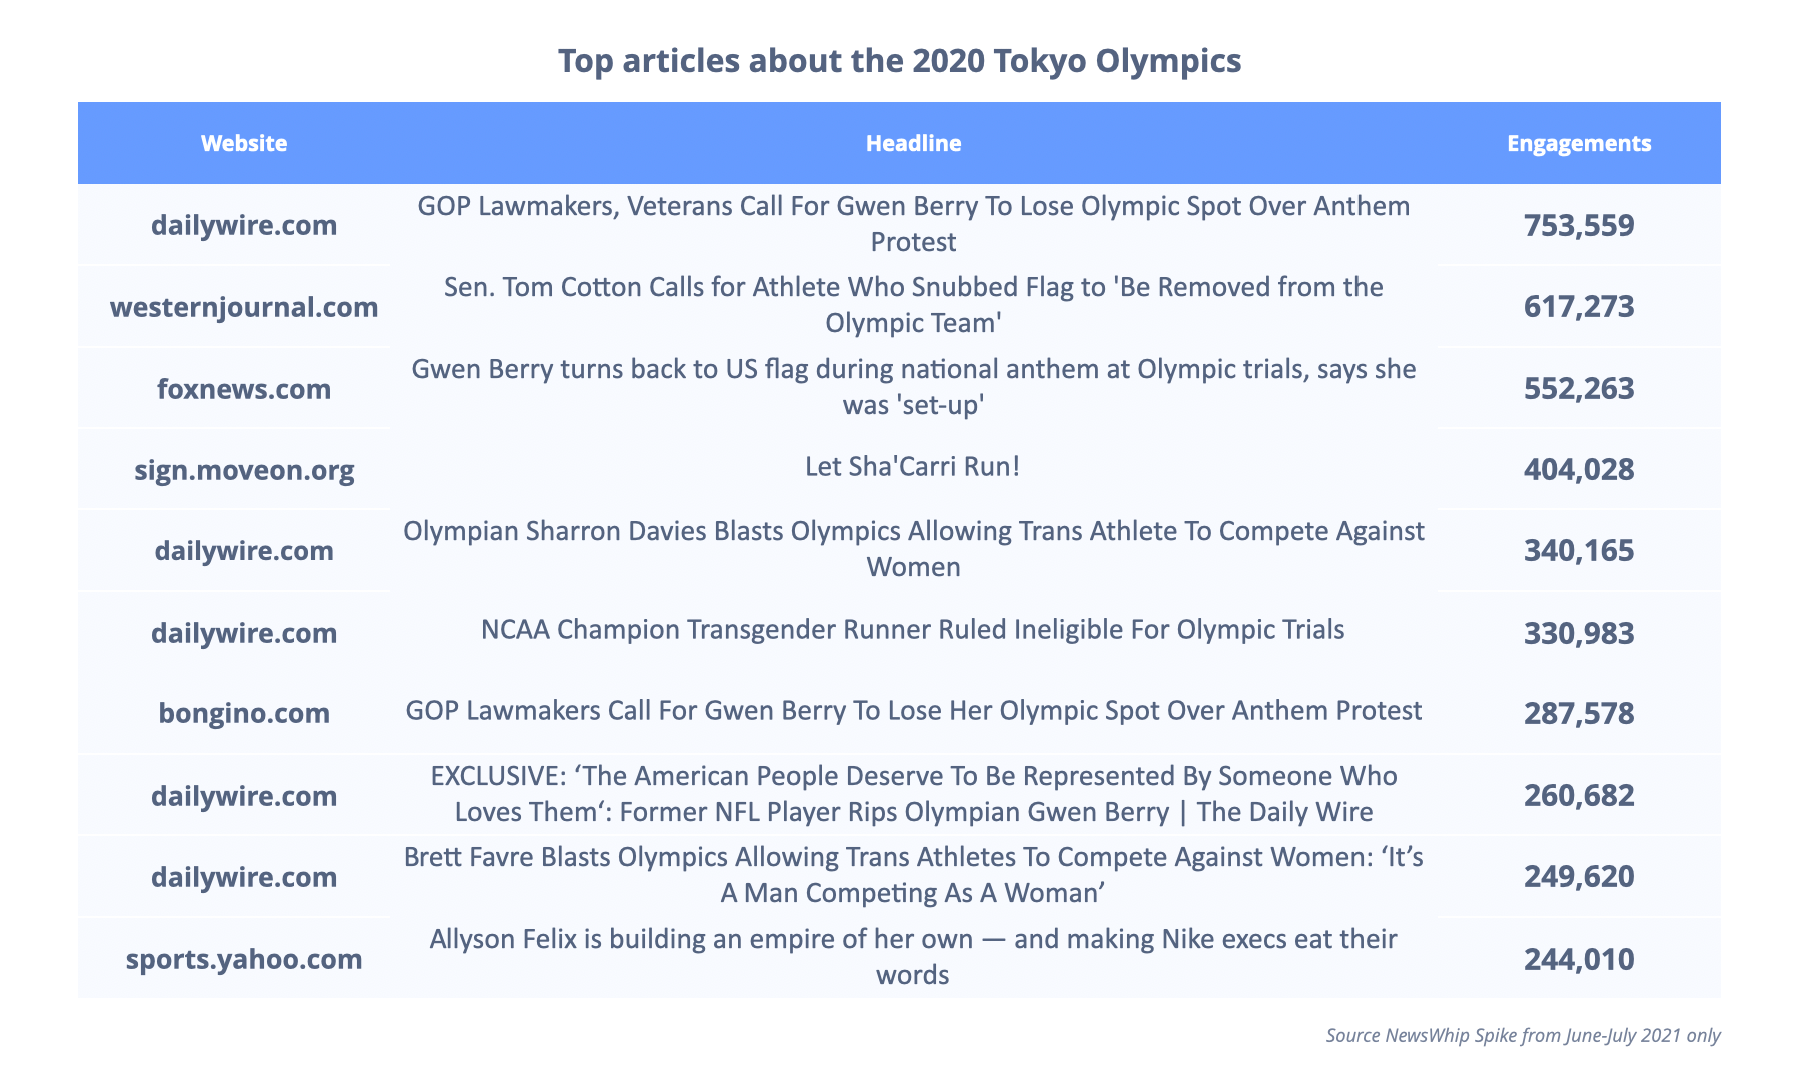 Chart showing the most engaged articles about the Tokyo Olympics